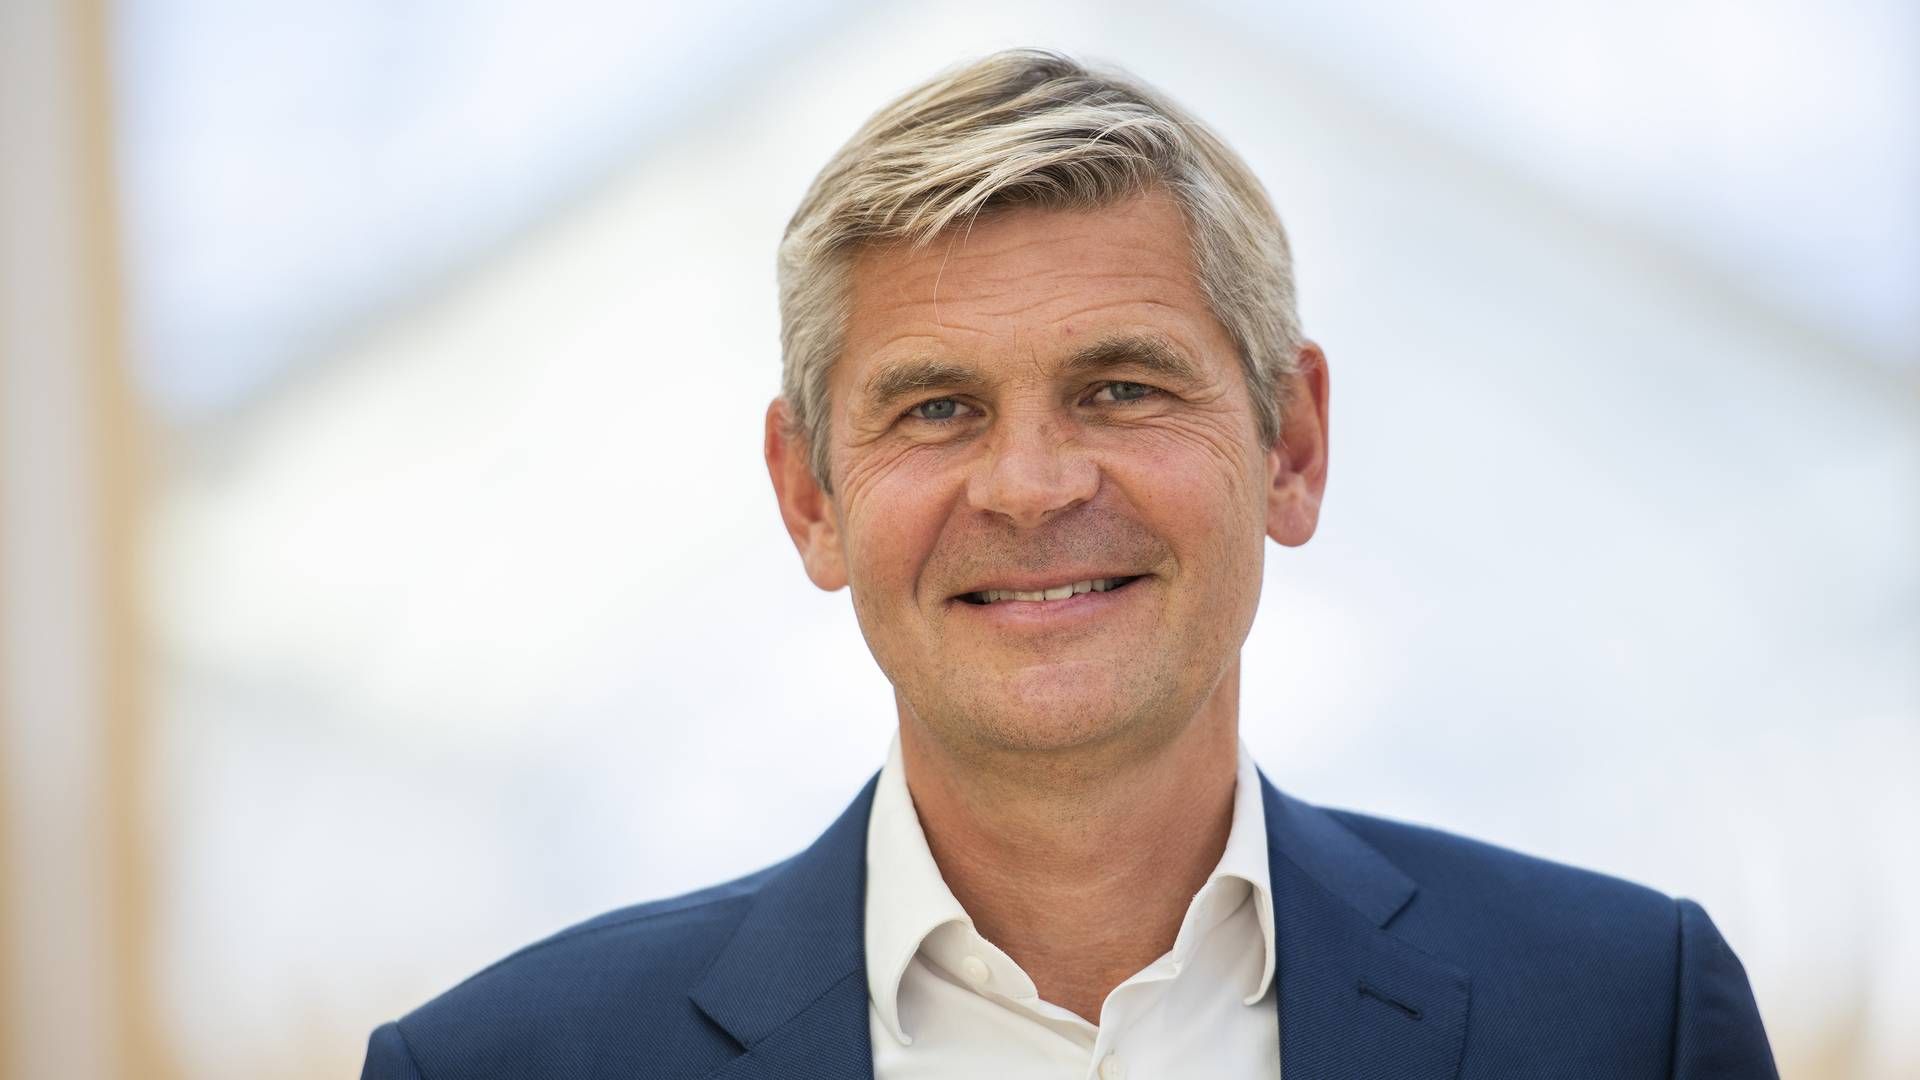 Søren Tulstrup previously served as CEO of Vifor Pharma, and is currently the CEO of Hansa Biopharma | Photo: Hansa Biopharma